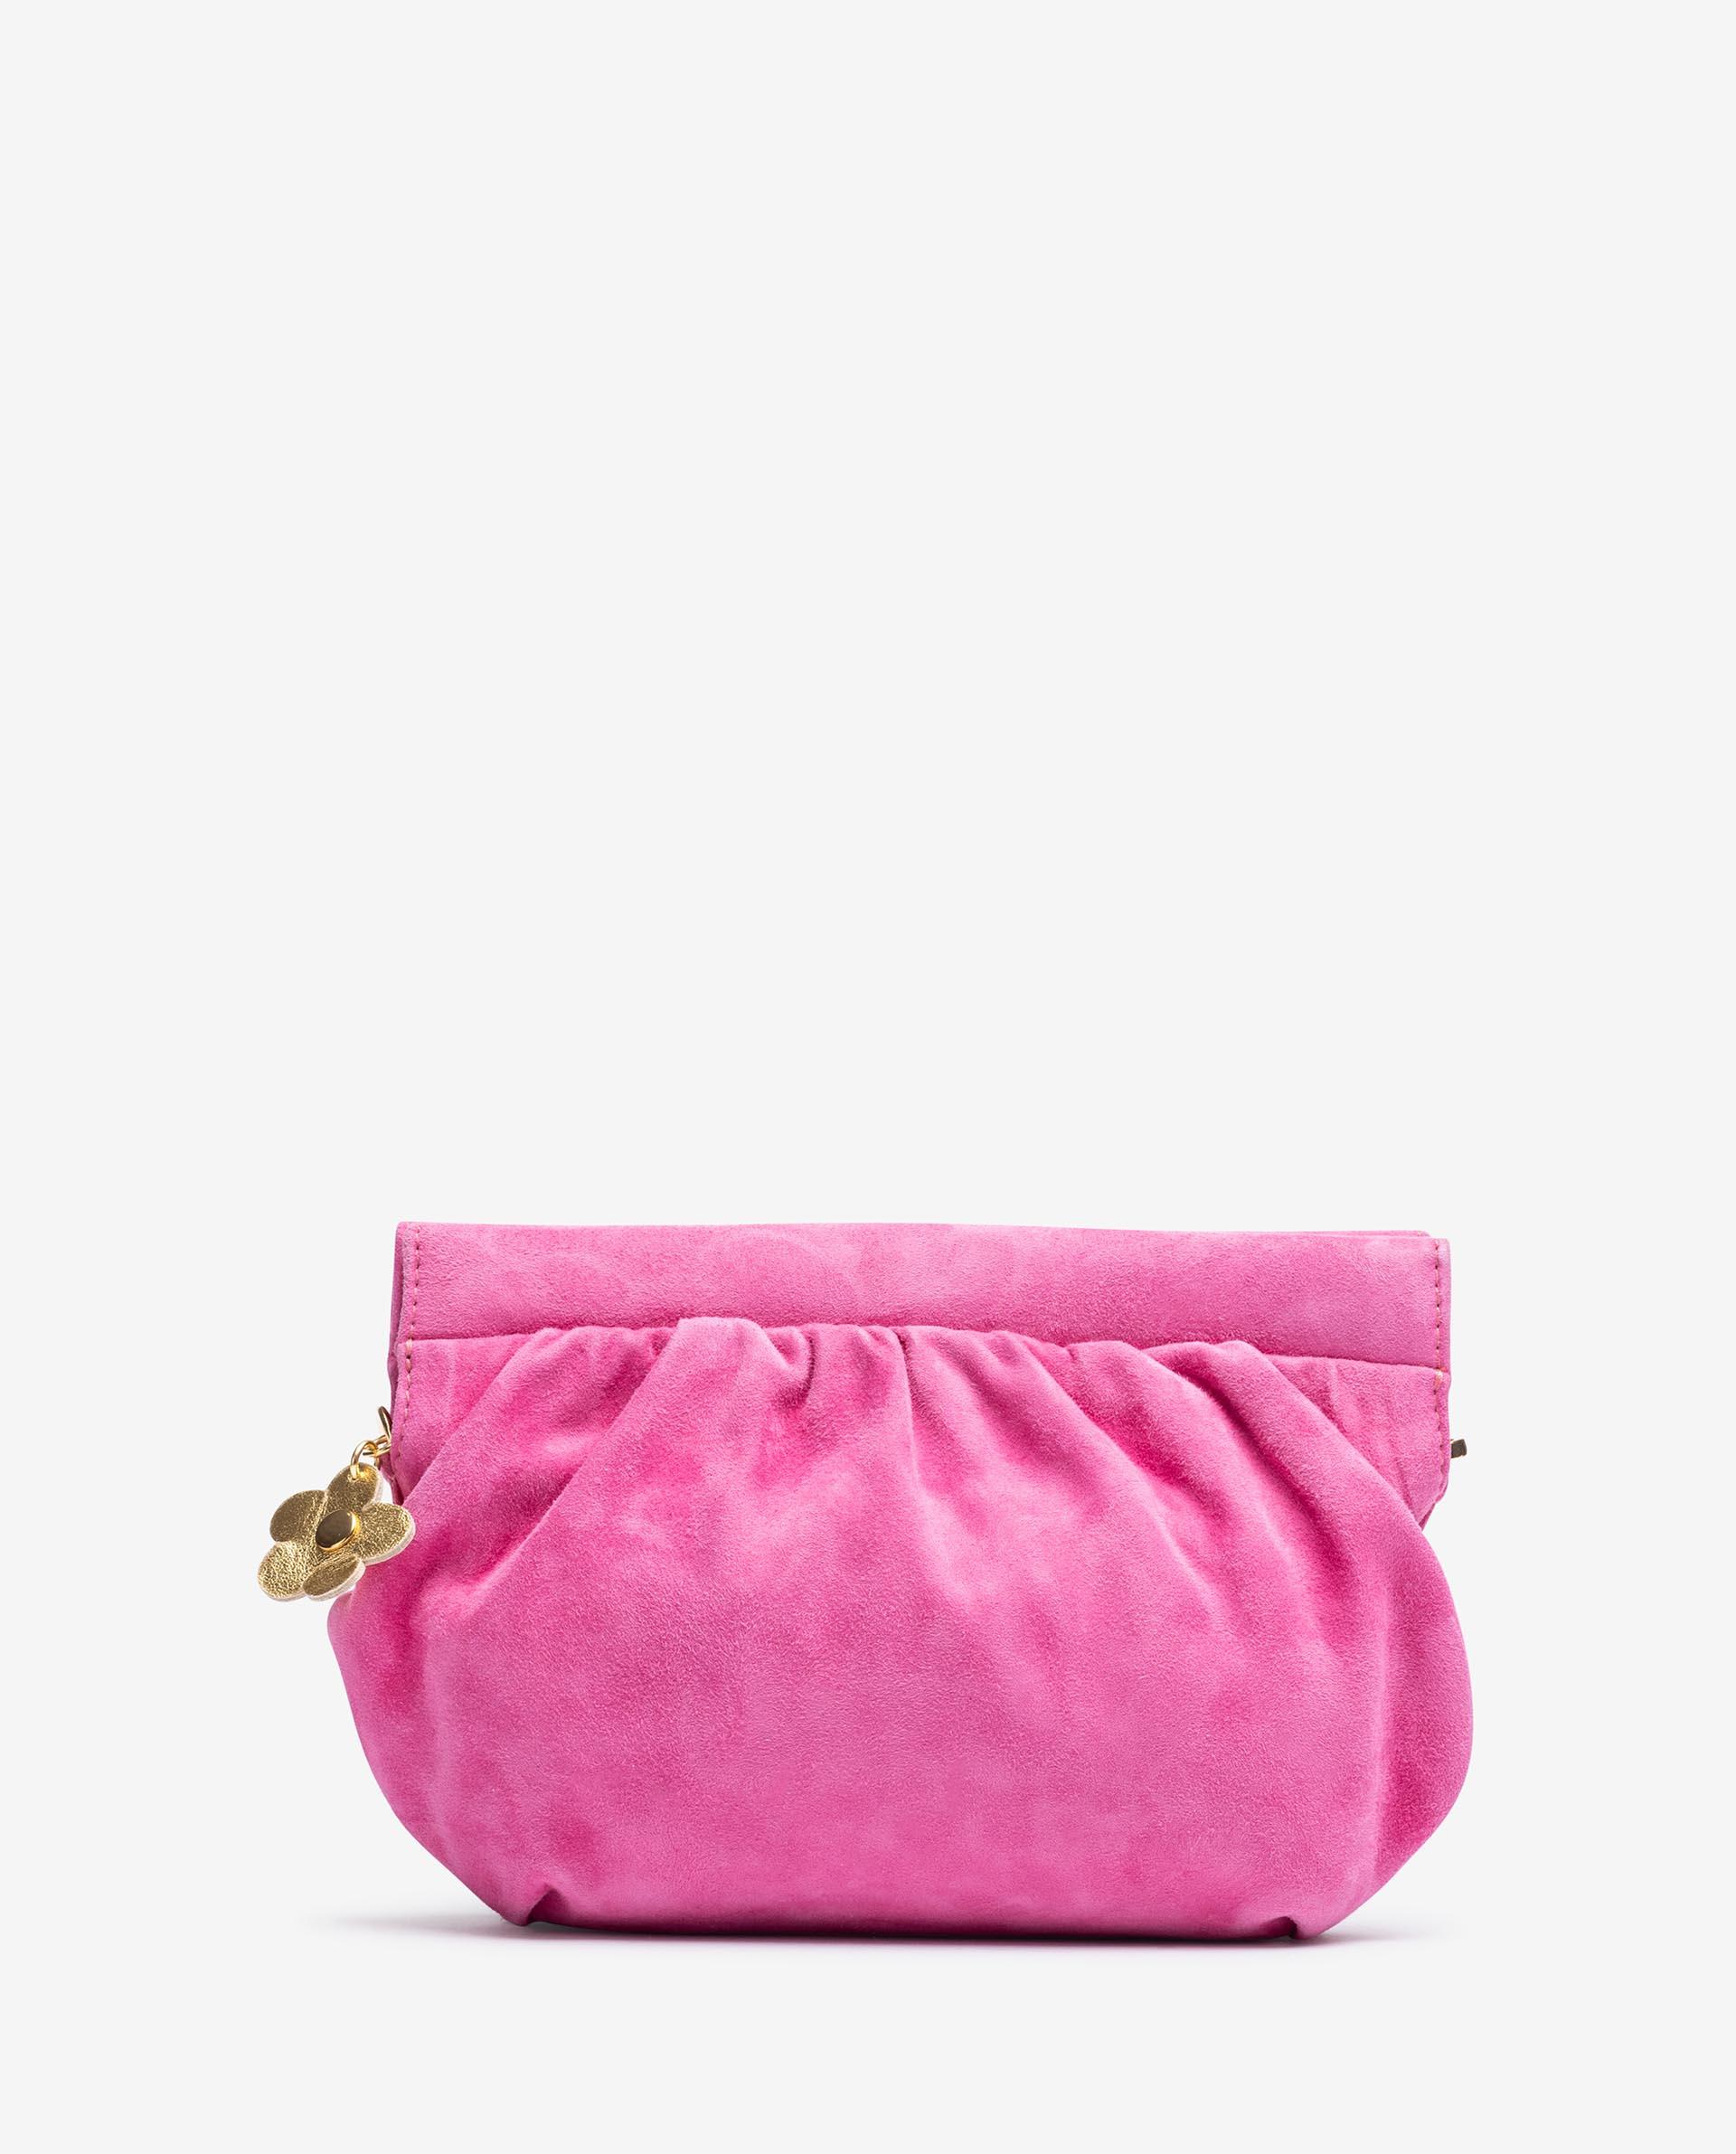 Sold at Auction: Pretty in Pink Suede “Prada” Purse